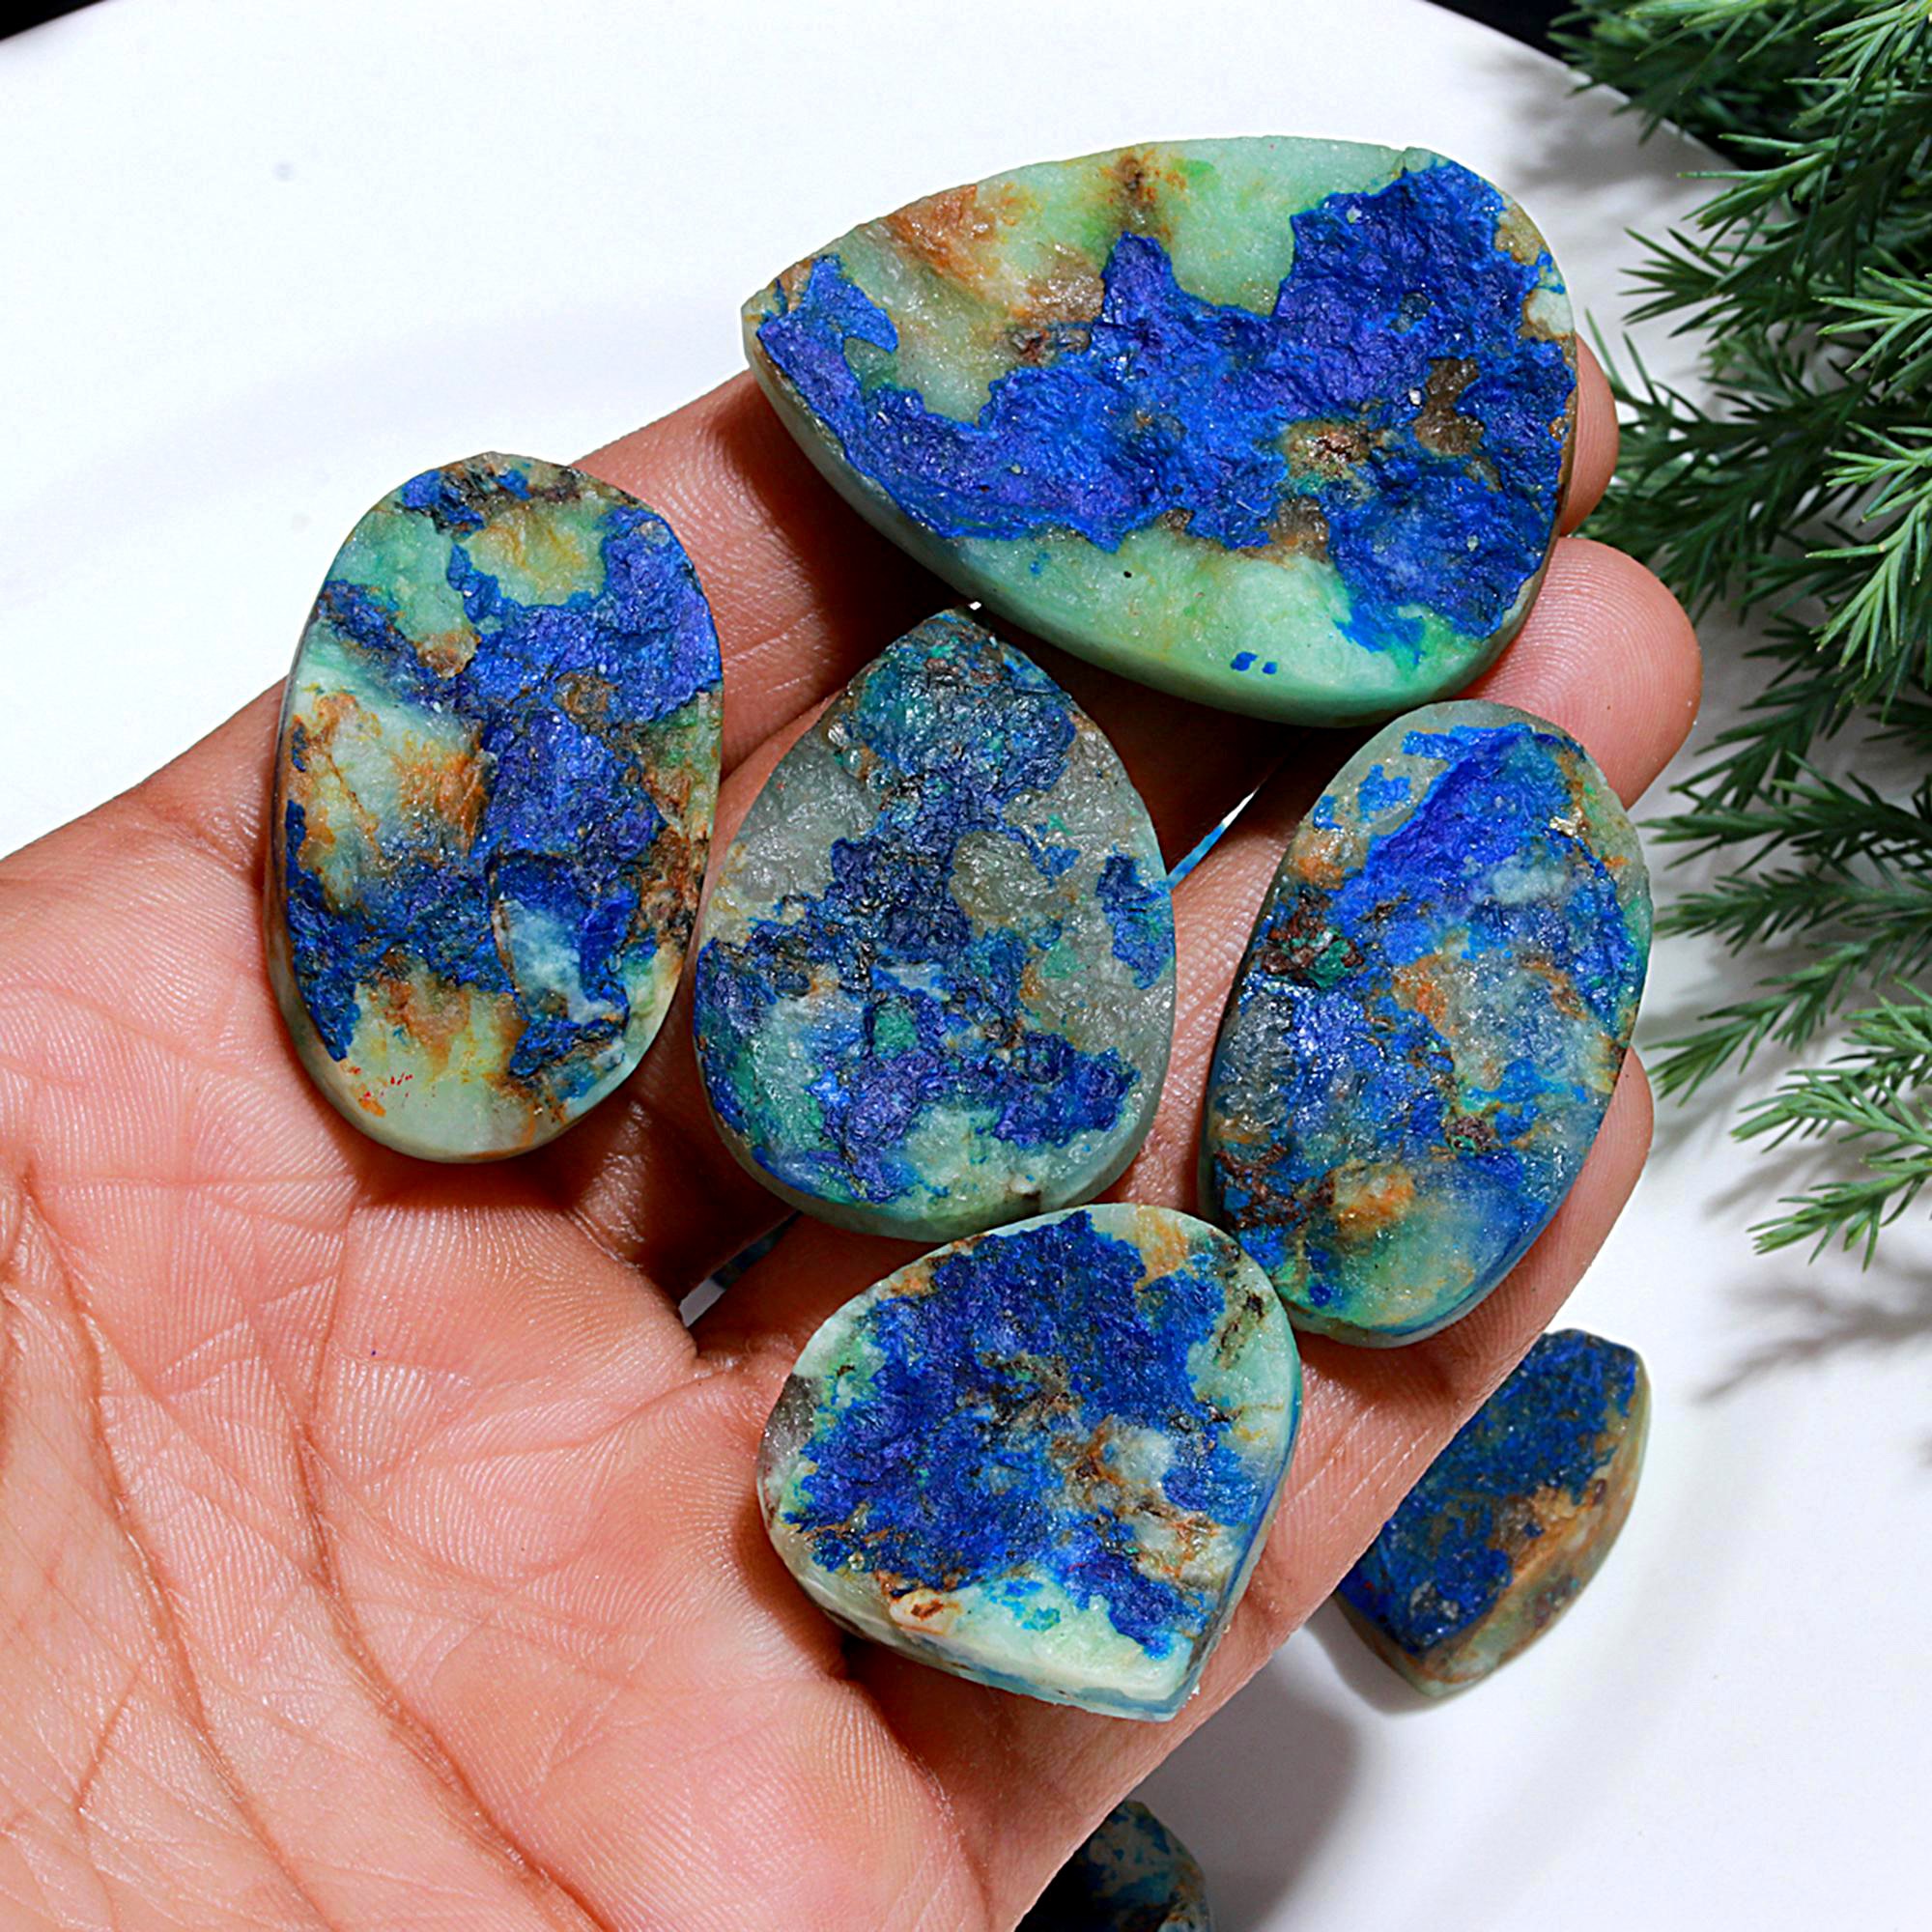 14 Pcs 538.Cts Natural Azurite Druzy Unpolished Loose Cabochon Gemstone For Jewelry Wholesale Lot Size 42x28 21x21mm